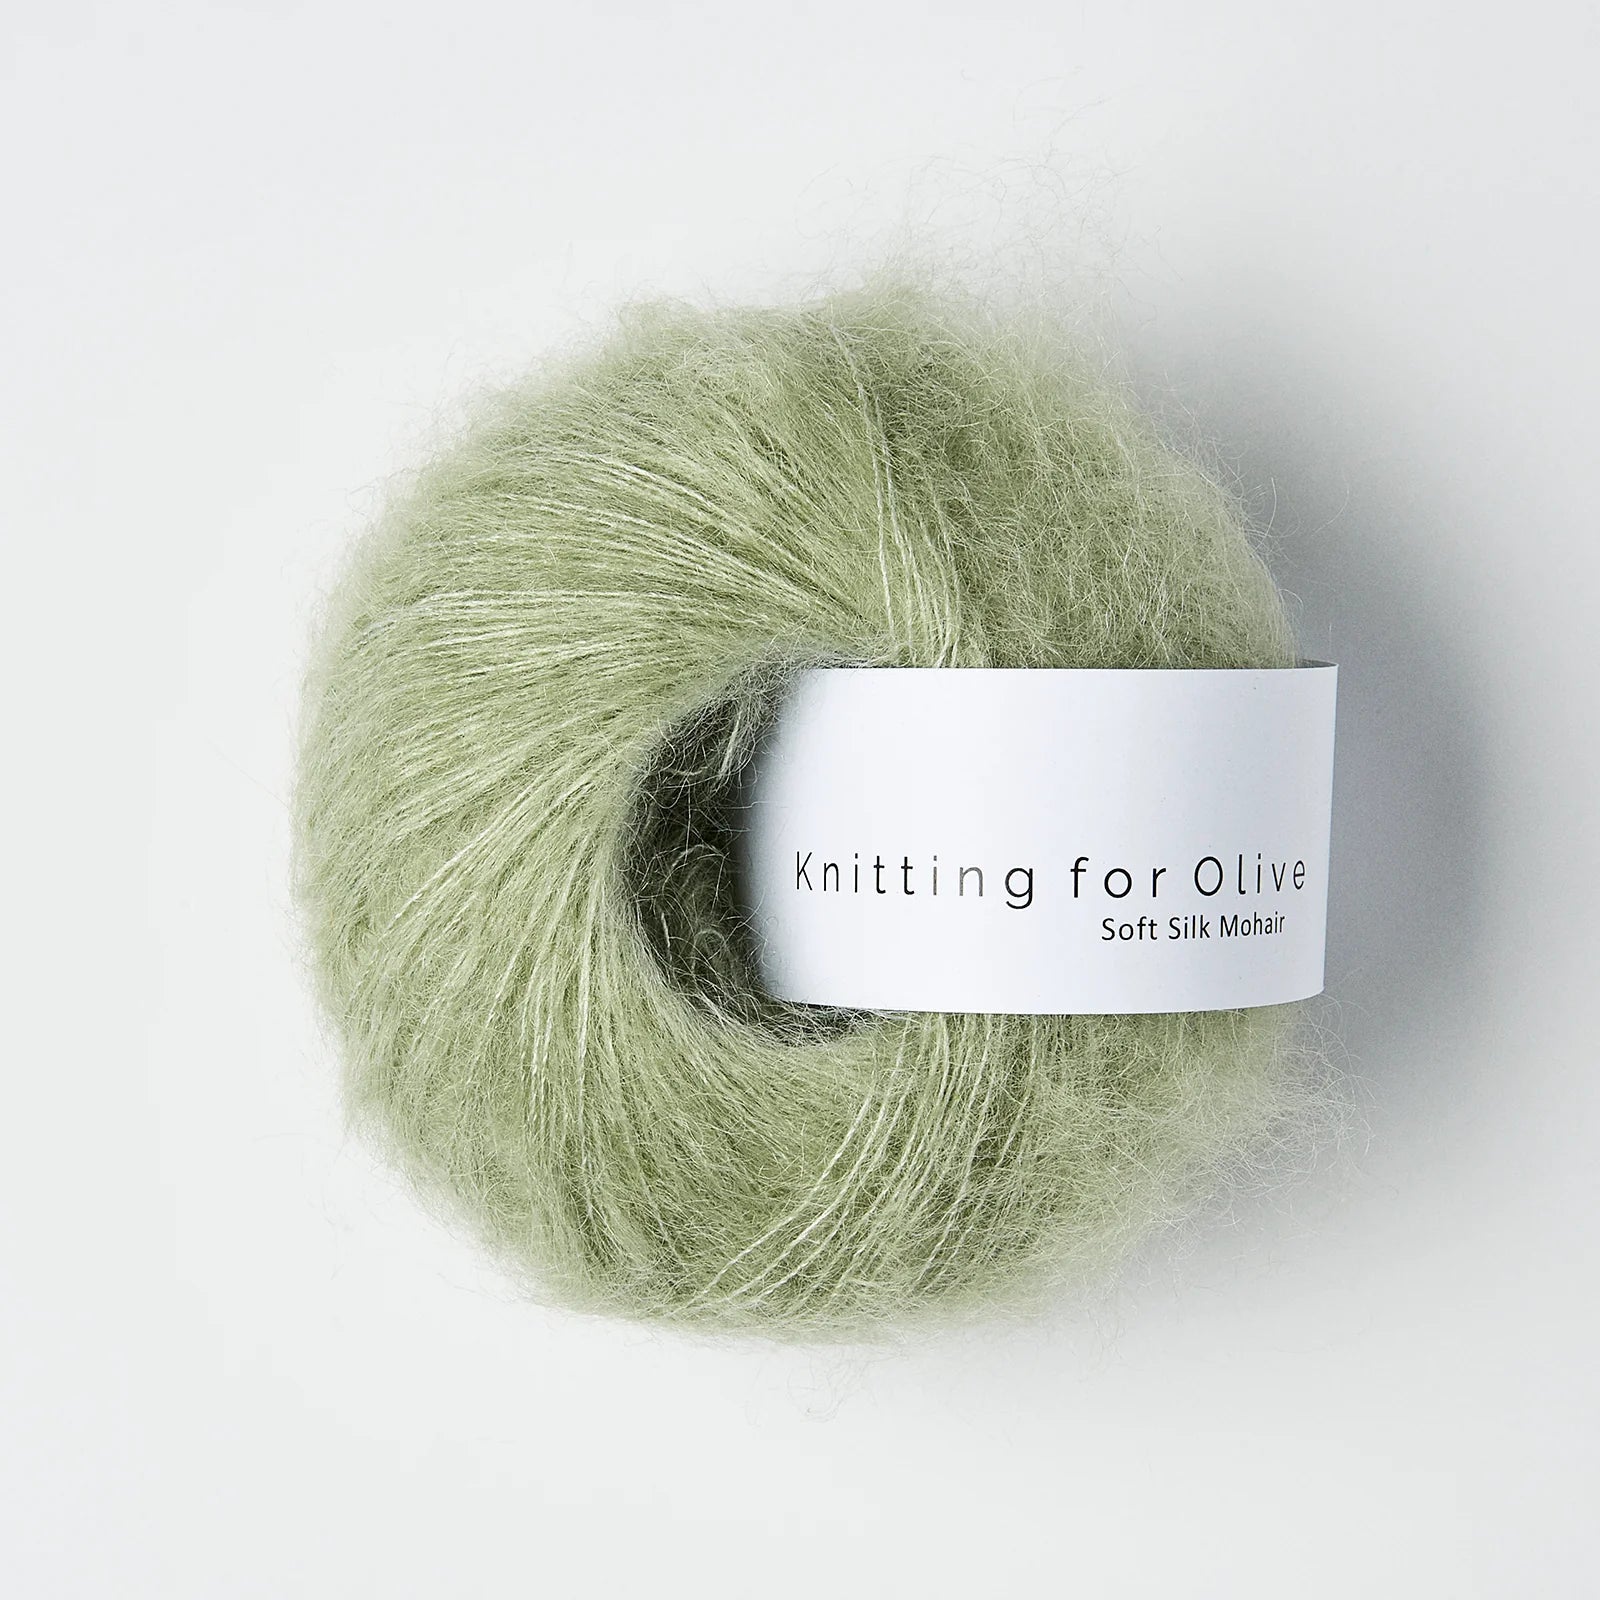 Knitting for Olive Soft Silk Mohair - Knitting for Olive - Dusty Artichoke - The Little Yarn Store